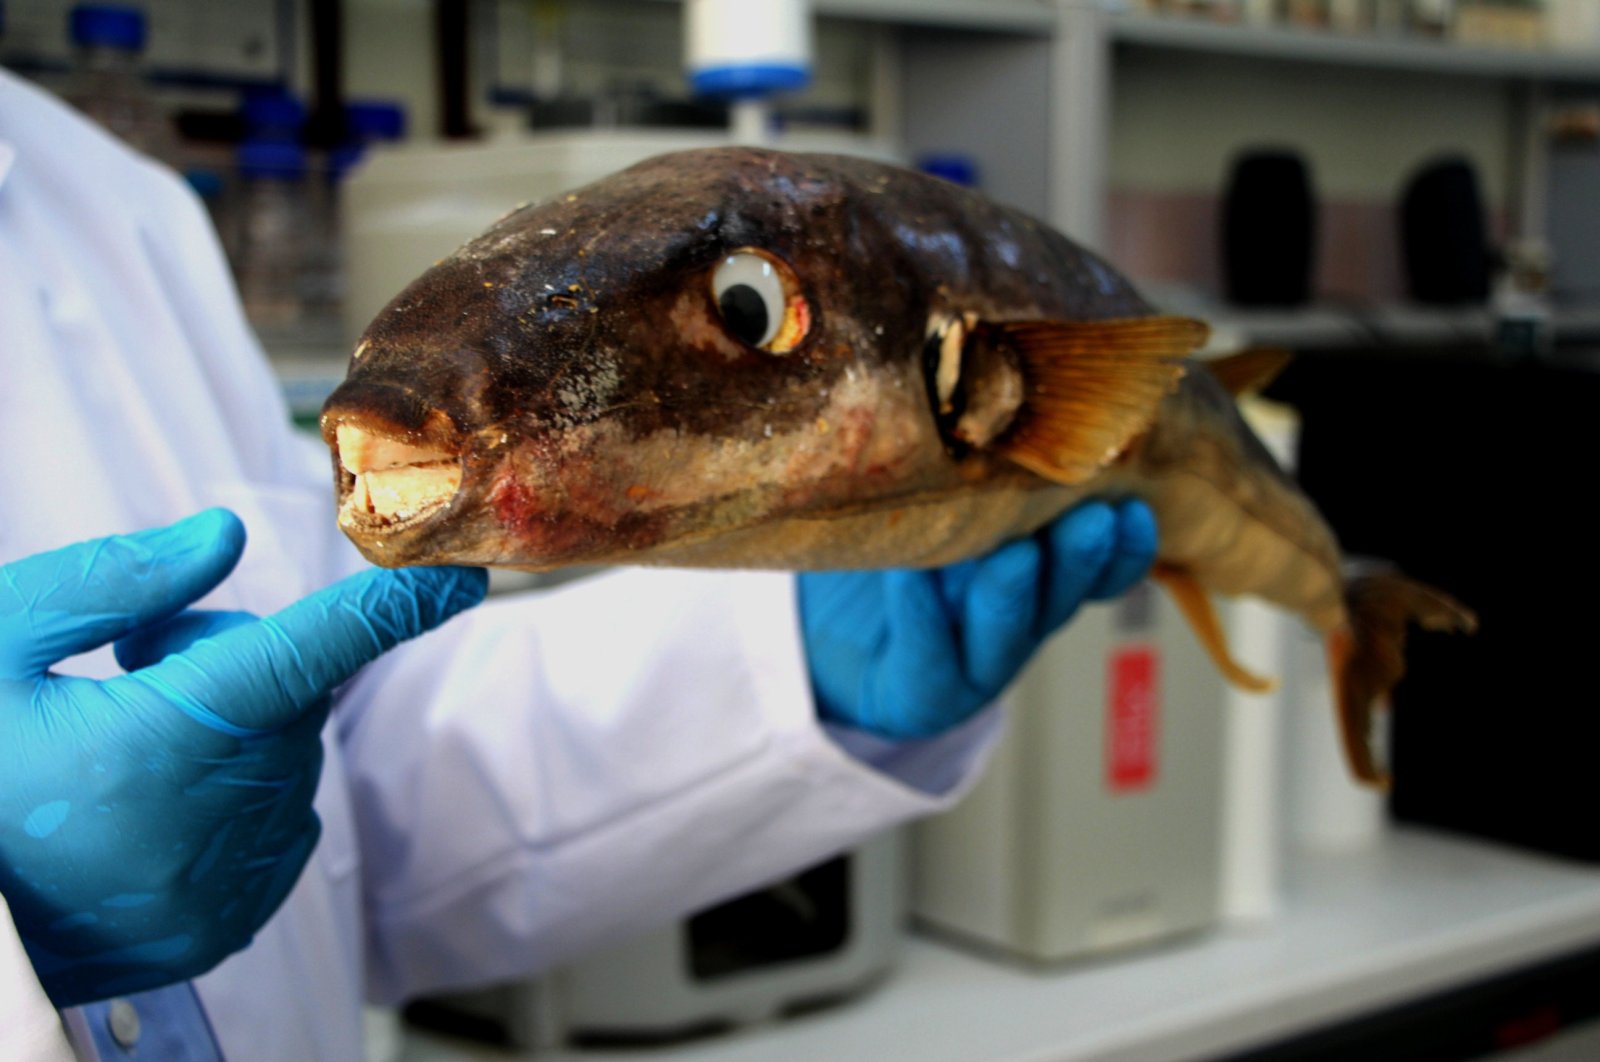 A researcher shows a toadfish captured in Adana, southern Turkey, Dec. 19, 2020. (DHA PHOTO) 